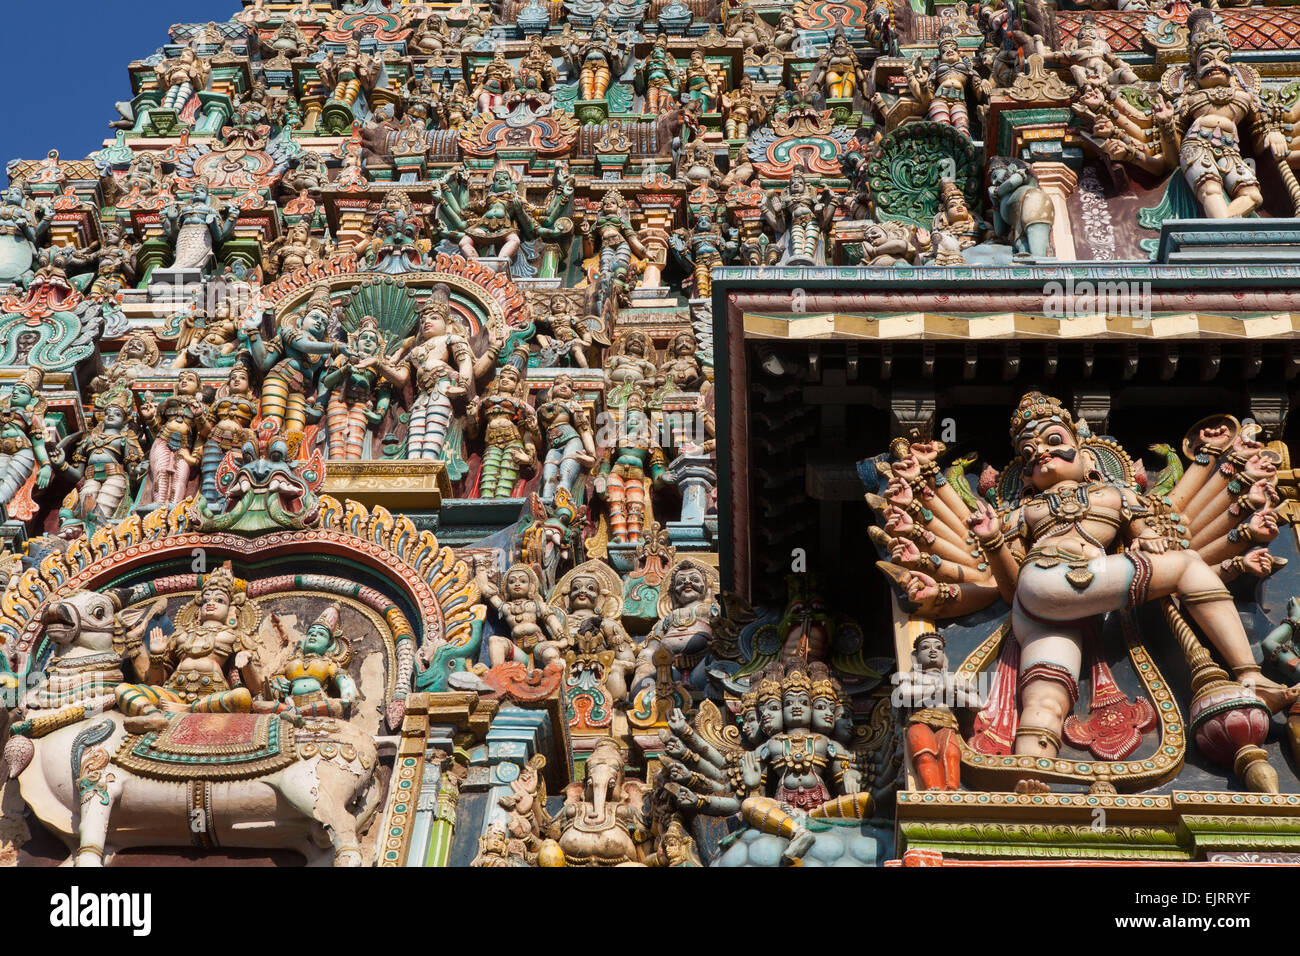 Detail of the sculptures on the gopuram at the Sri Meenakshi Temple in Madurai Stock Photo